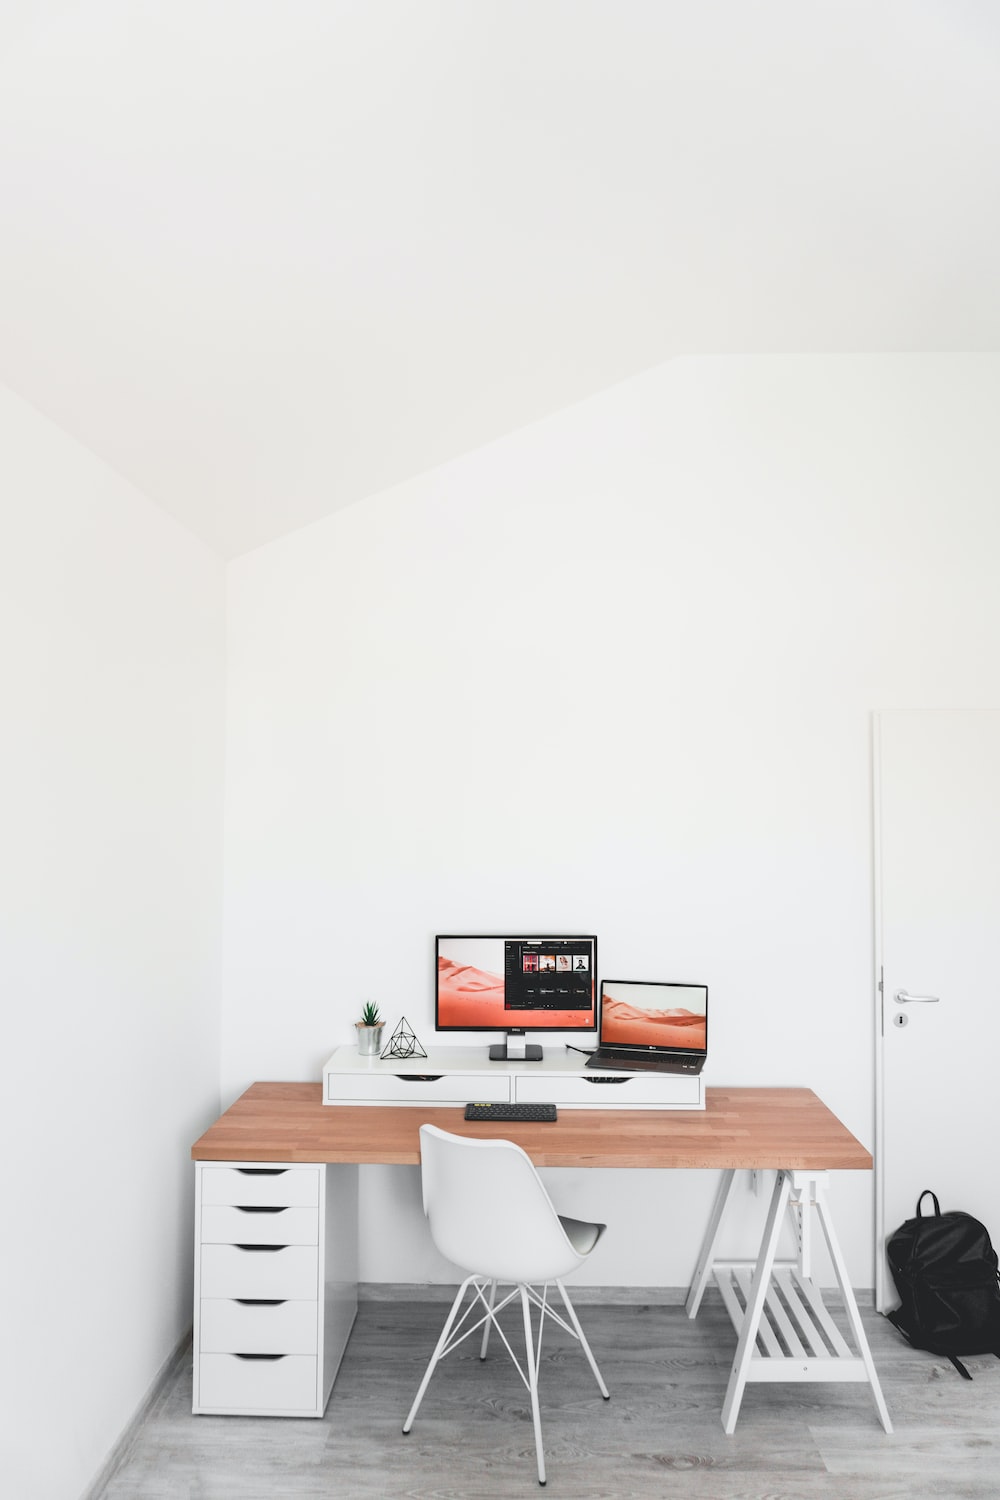 Where should a desk be placed in a house?